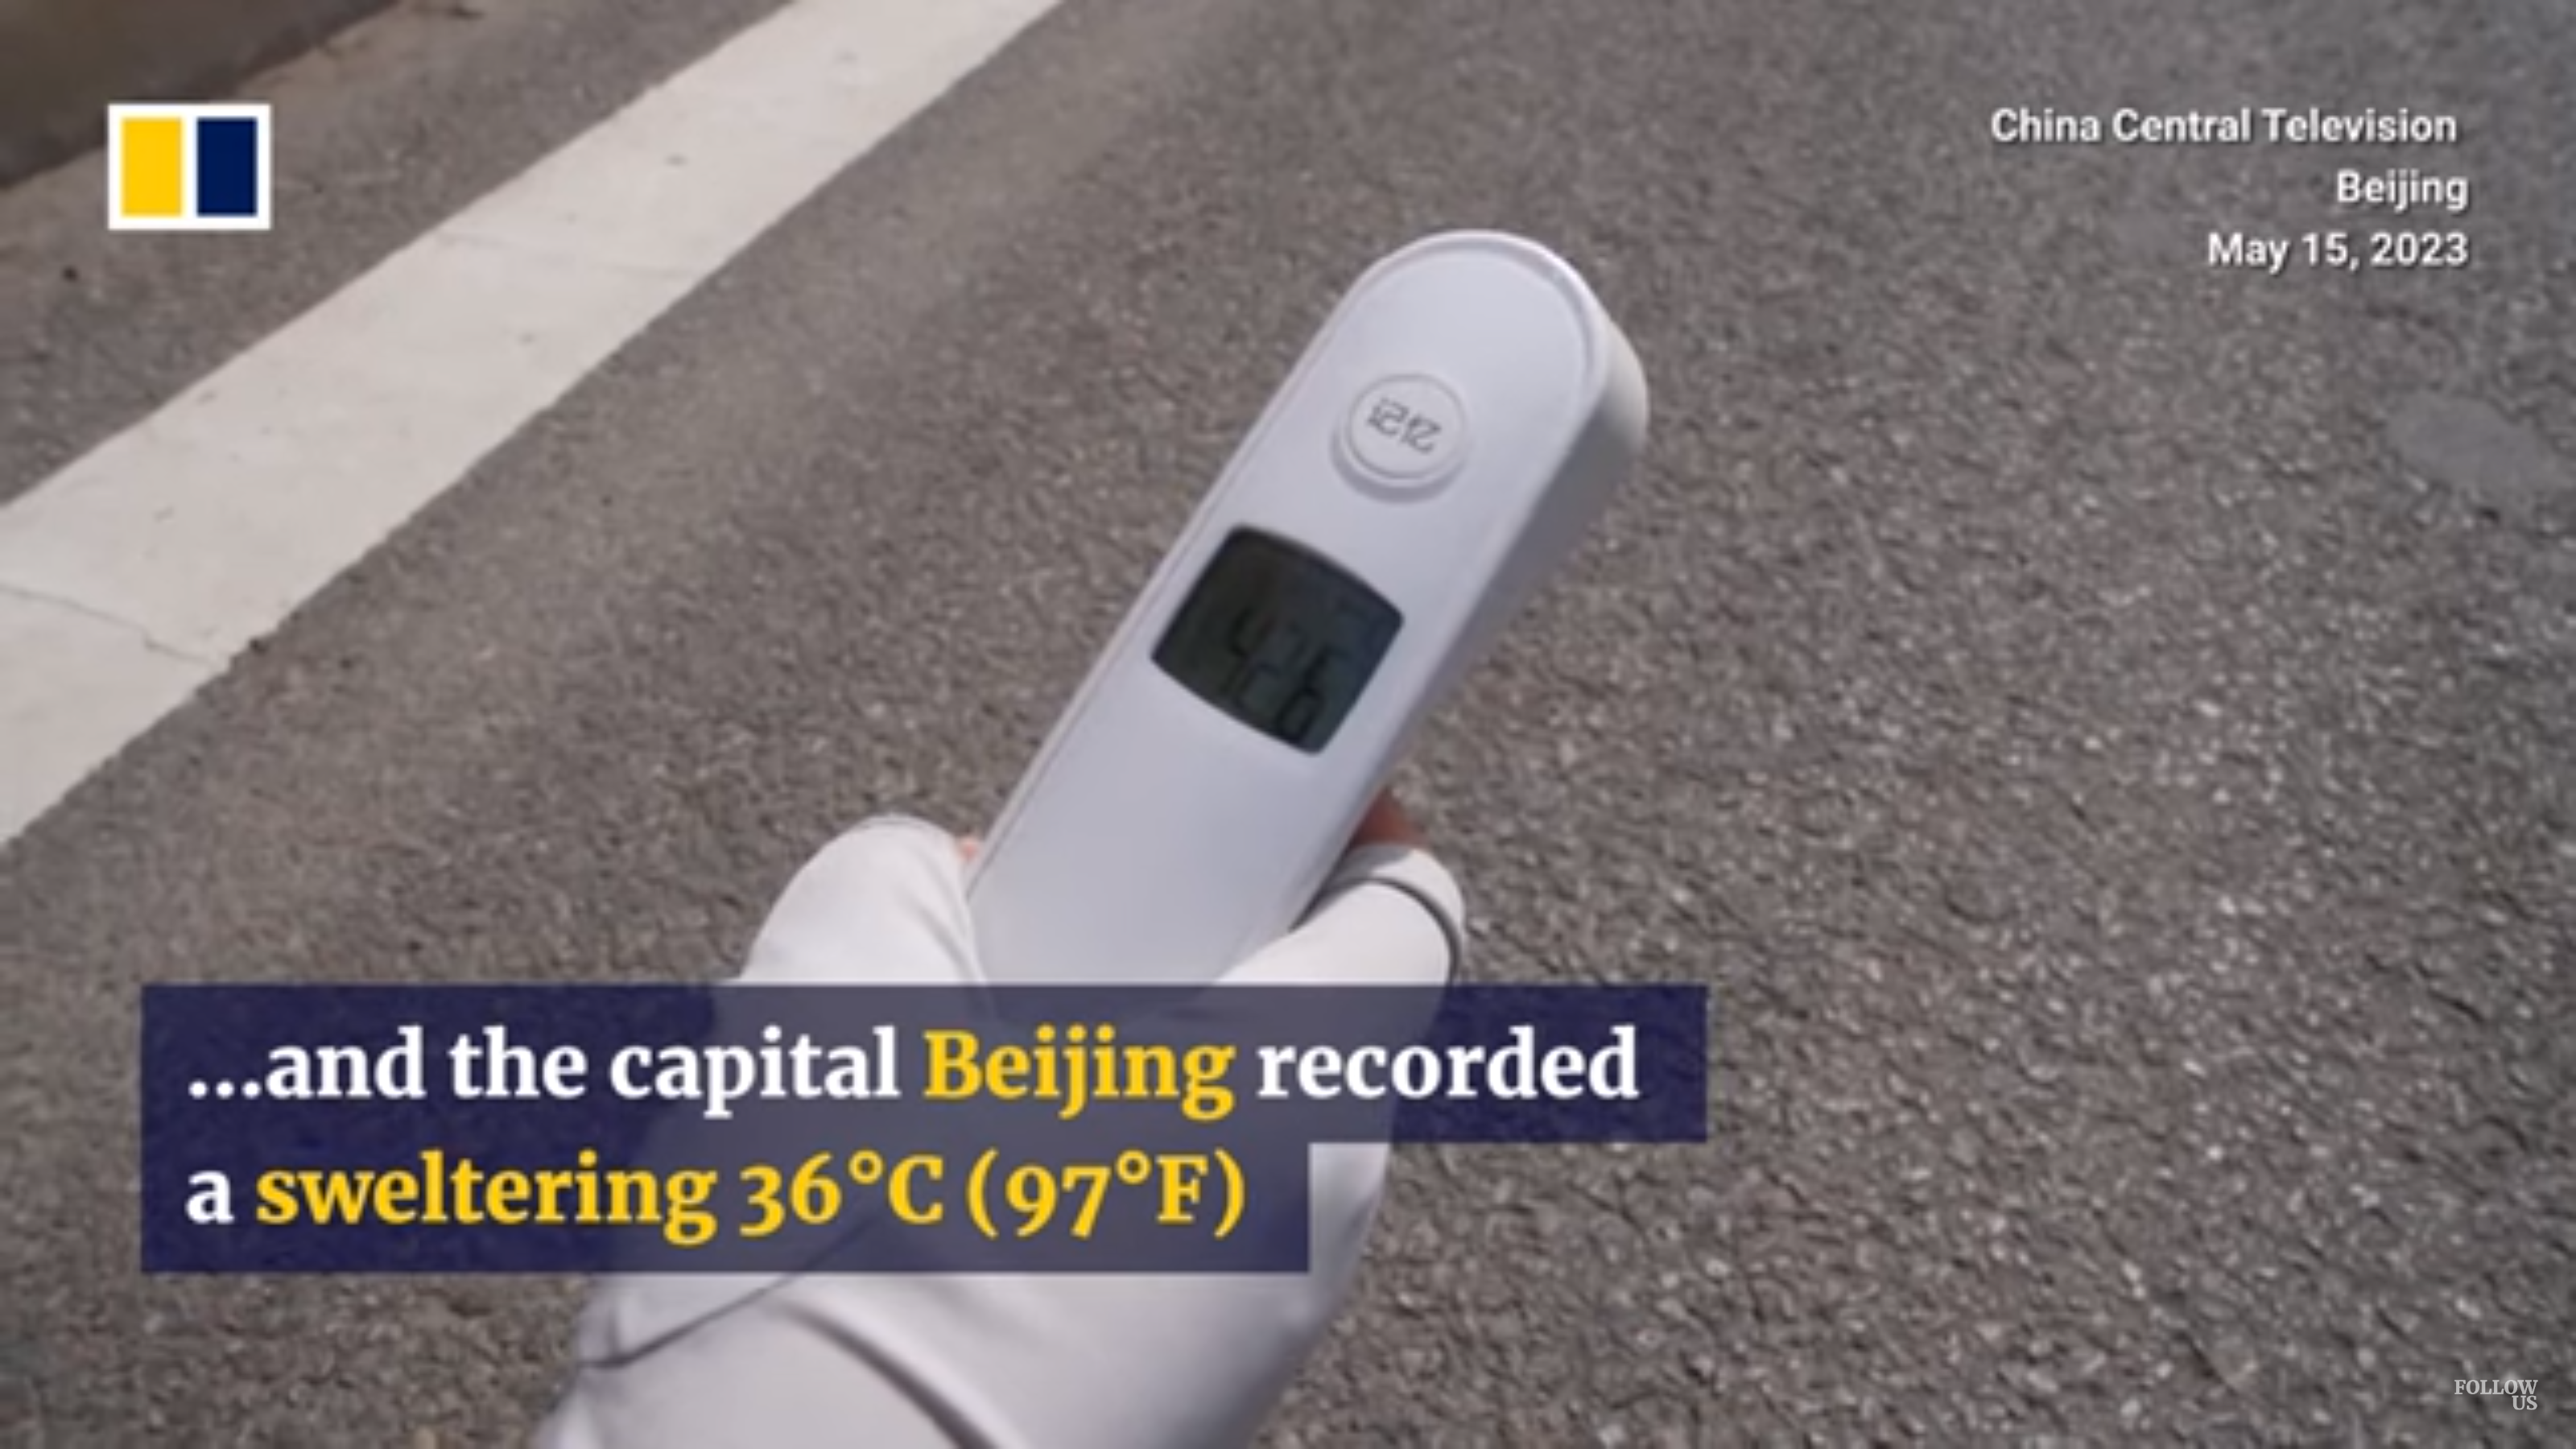 A worker uses a digital thermometer to record a surface temperature of 42.6°C (108.7°F) in Beijing, China on 15 May 2023. Photo: China Central Television / SCMP